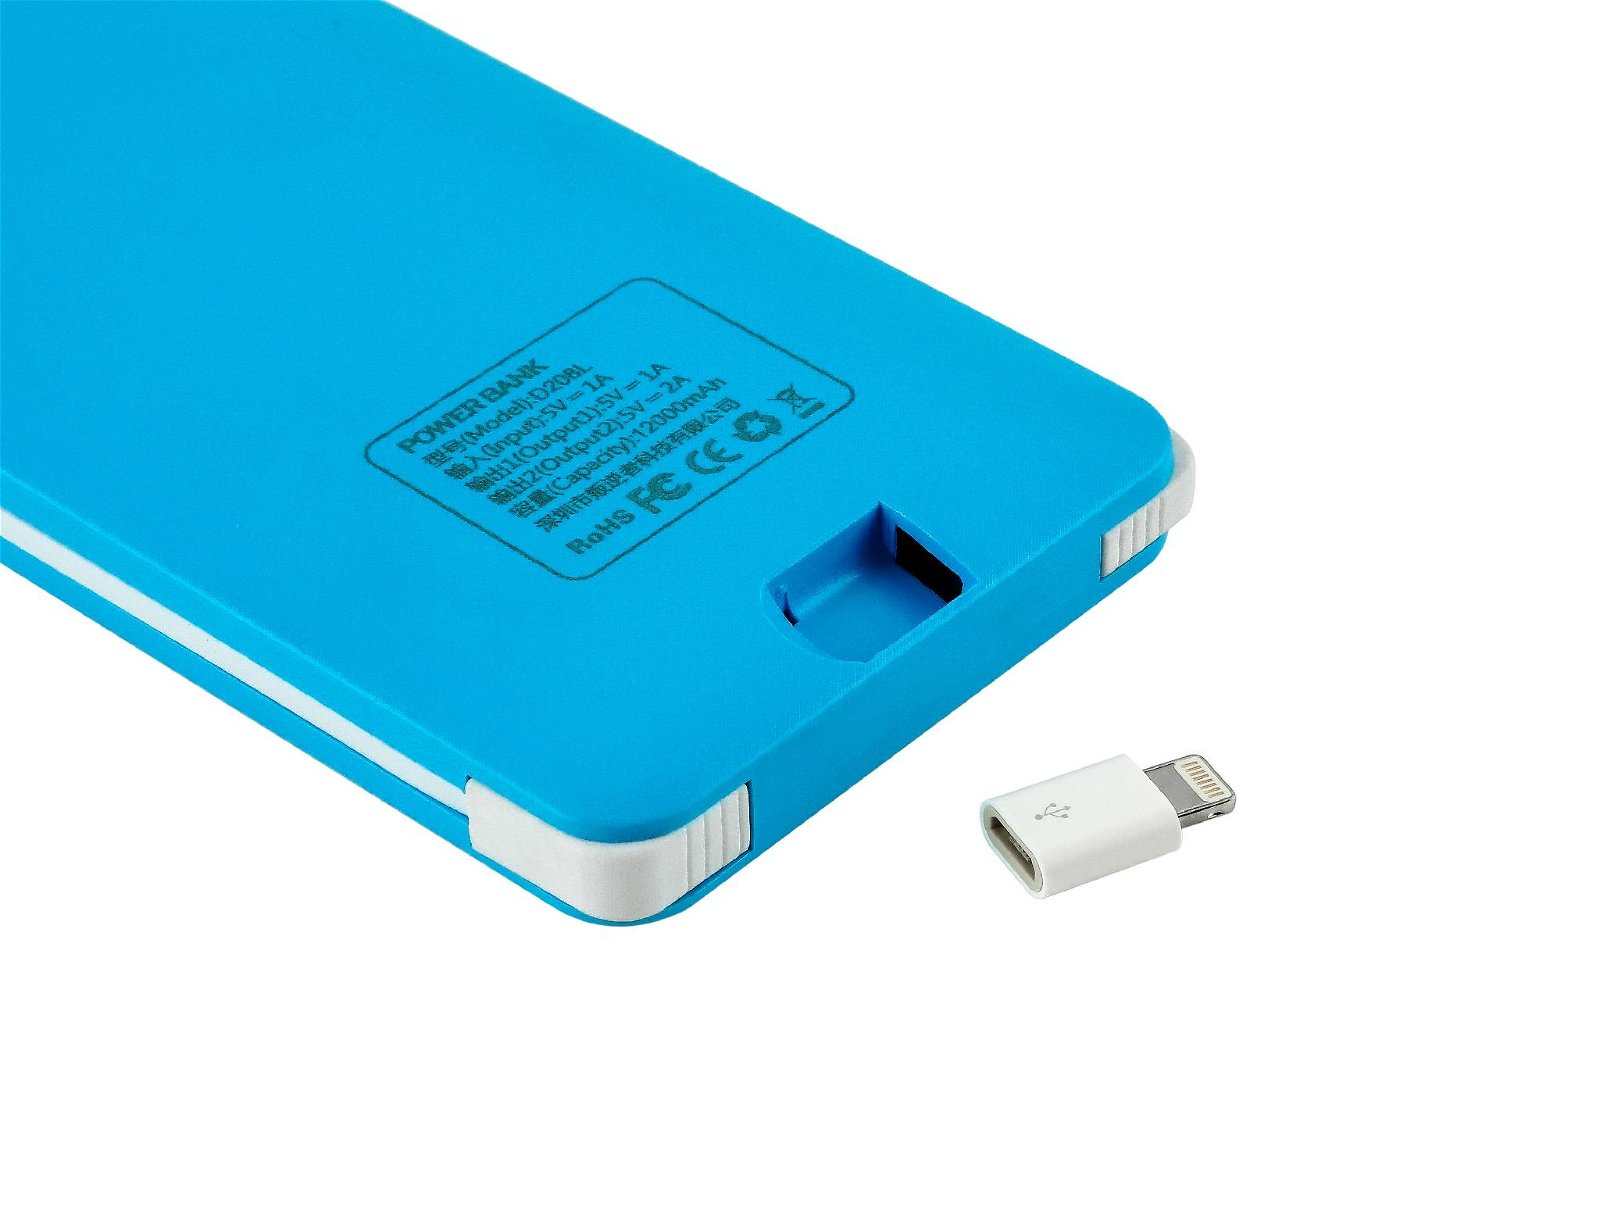 Multi-function polymers mobile power bank with iPhone 5 connector 4